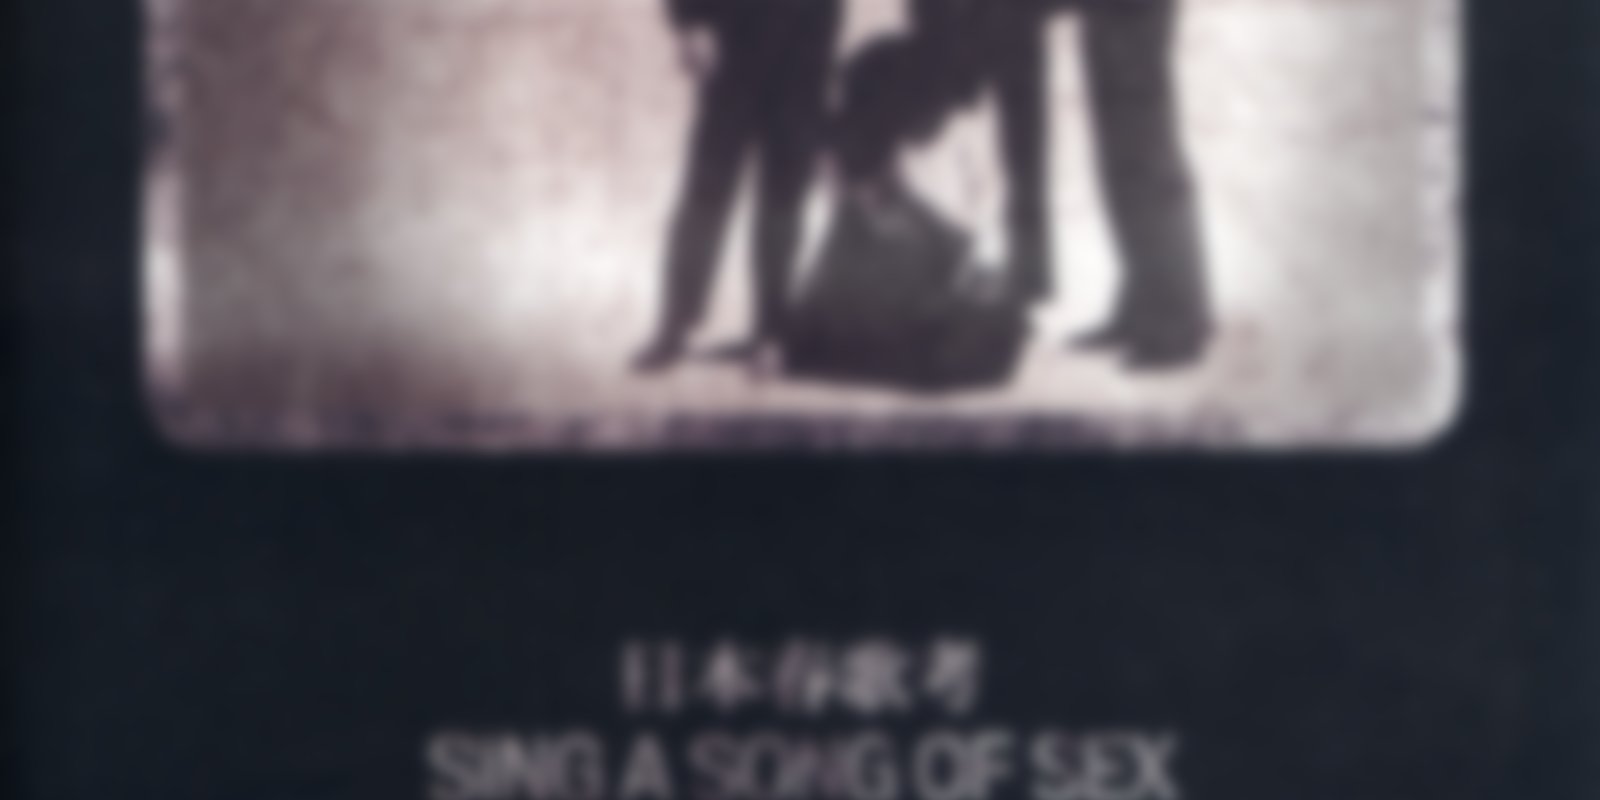 Sing a Song of Sex